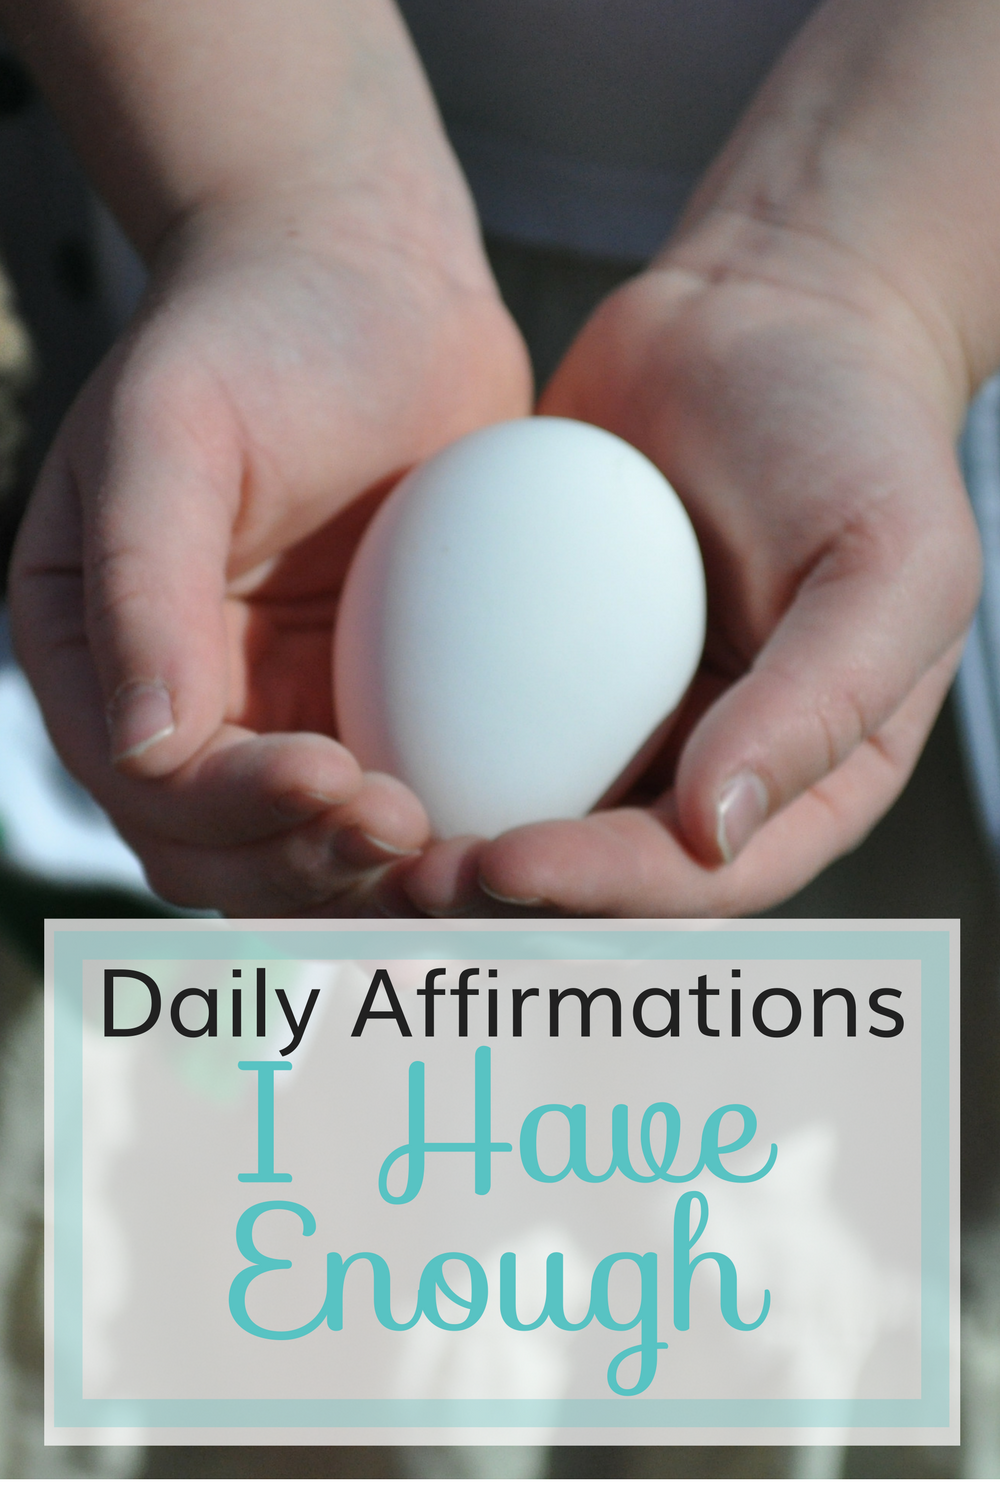 Daily Affirmations: I Have Enough. I believe this an affirmation we need to repeat to ourselves frequently to combat greed, selfishness, pride, and dissatisfaction in our lives.